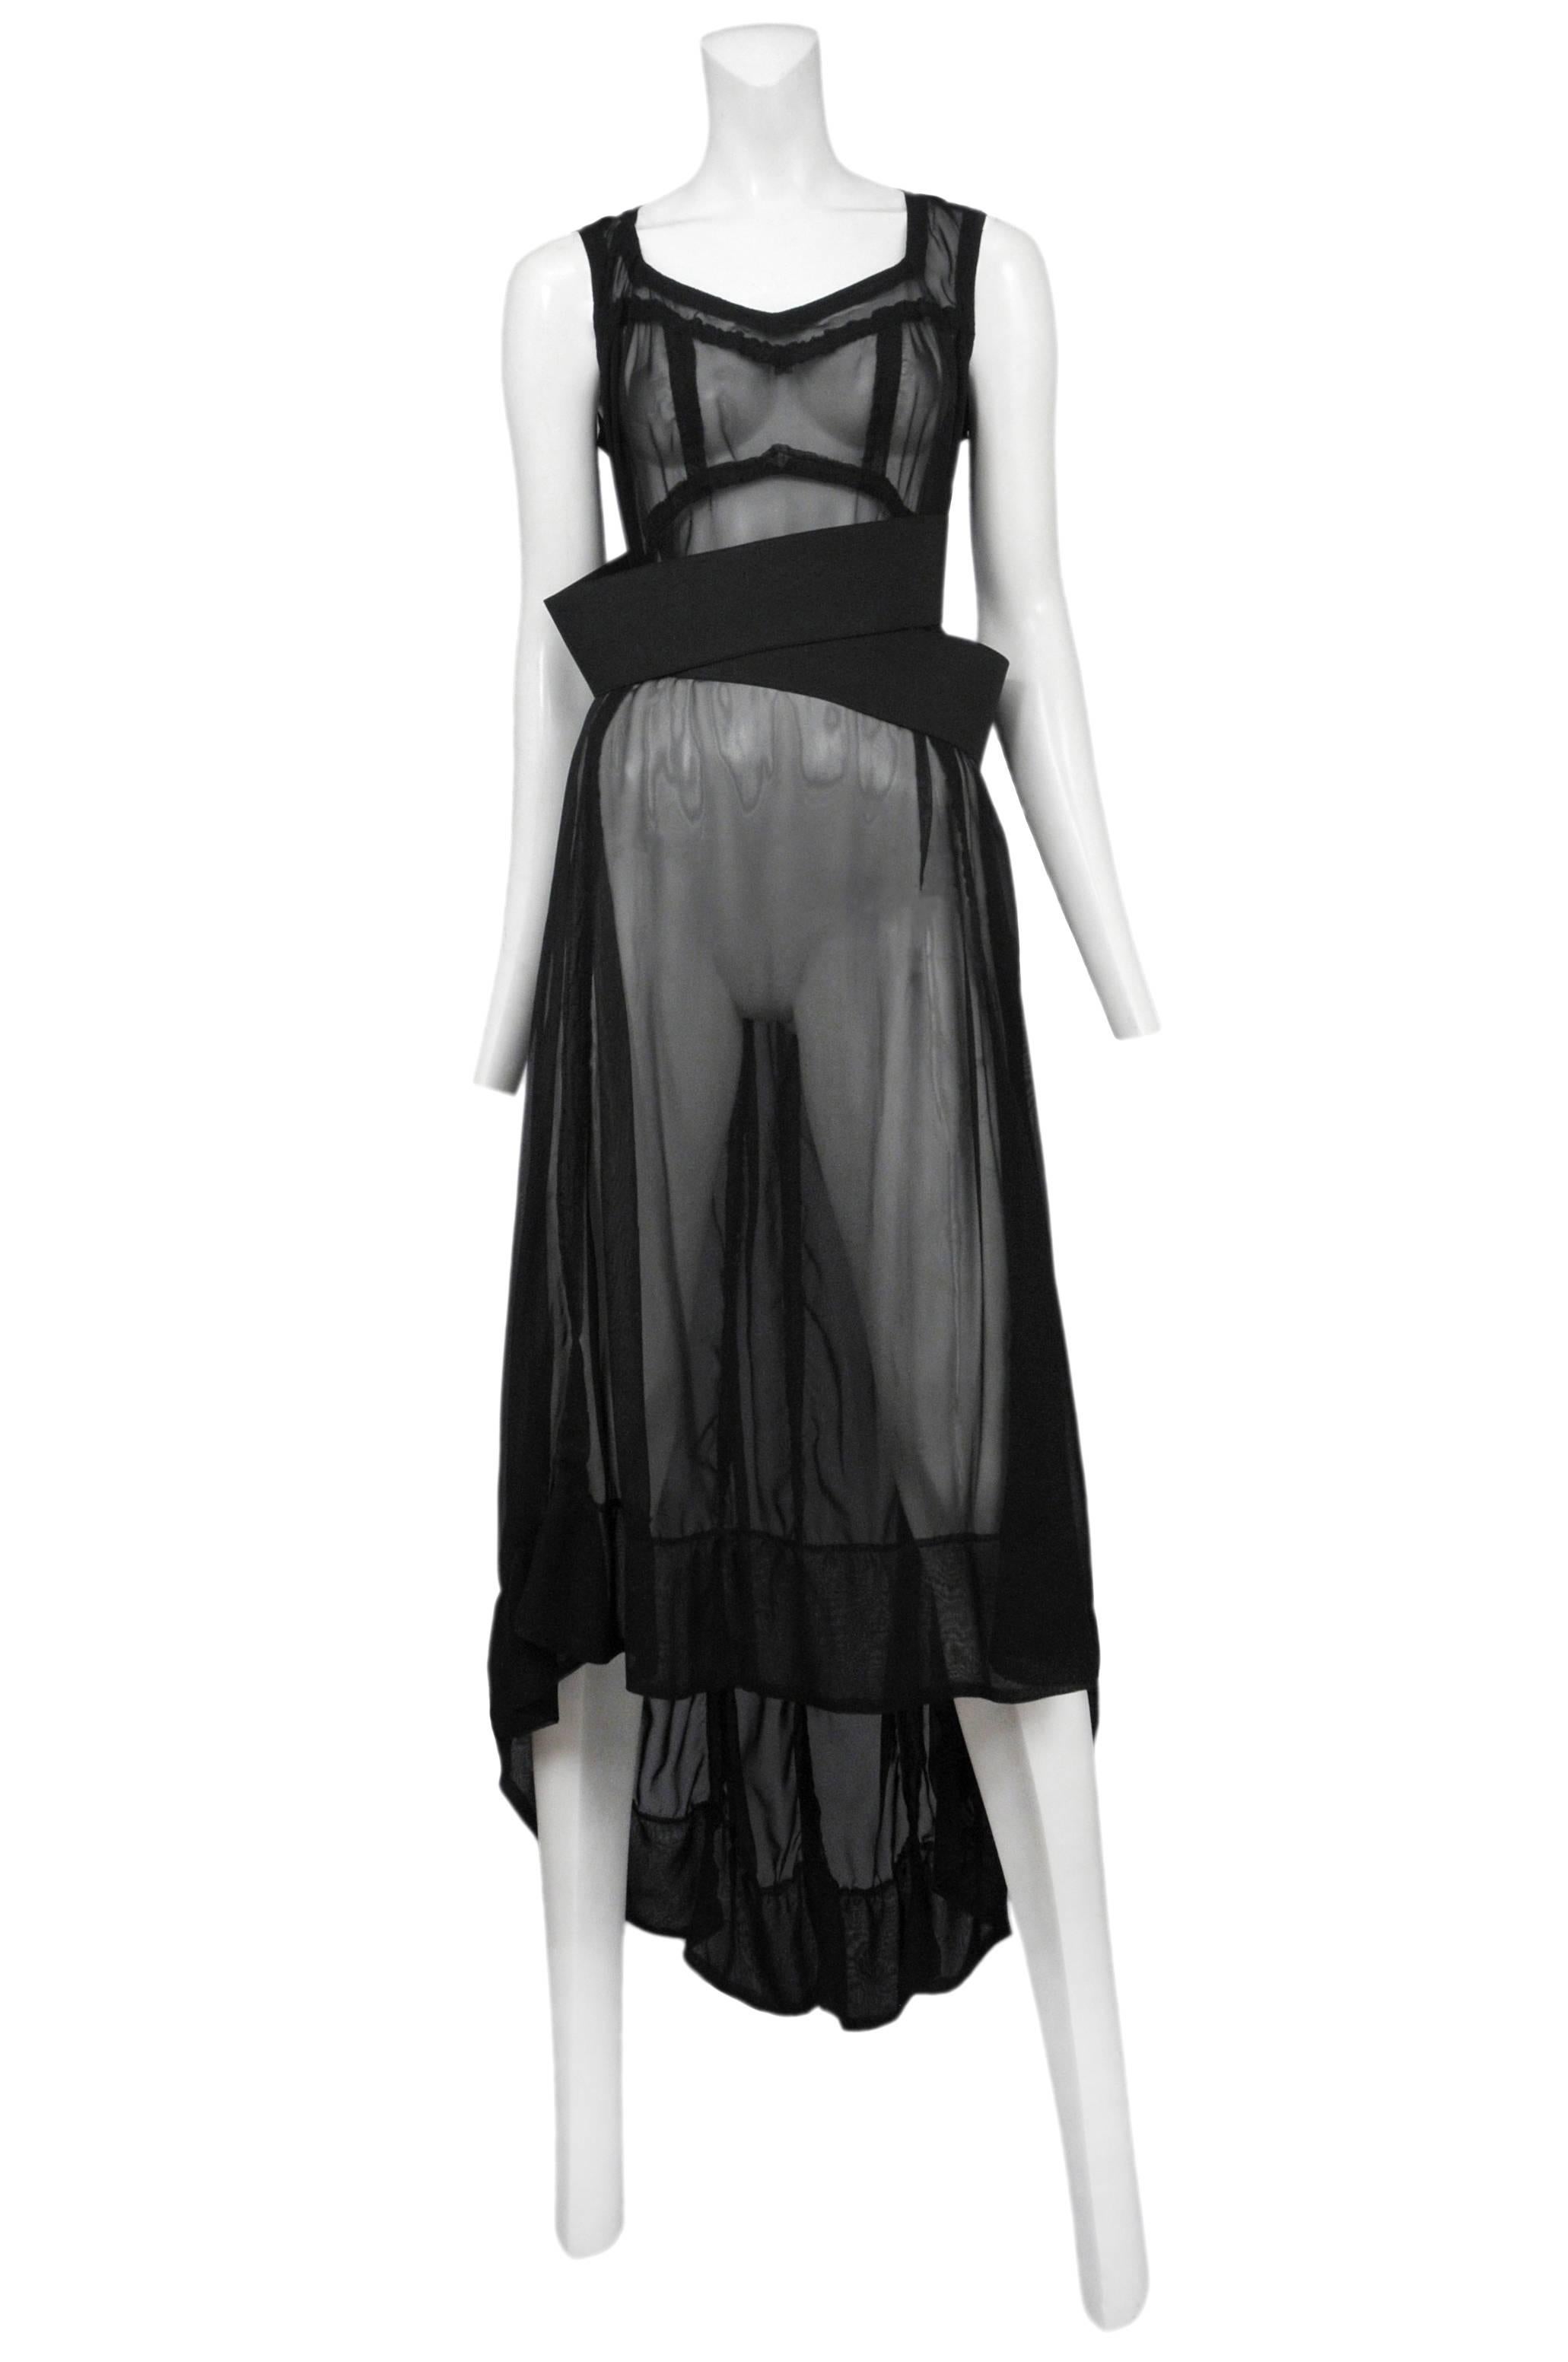 Vintage Commes des Garcons black sheer lingerie style slip dress featuring two wide black elastic bands at the waist and a hem that is longer in the back and shorter in the front. Circa Spring / Summer 2010.
Please inquire for additional images.